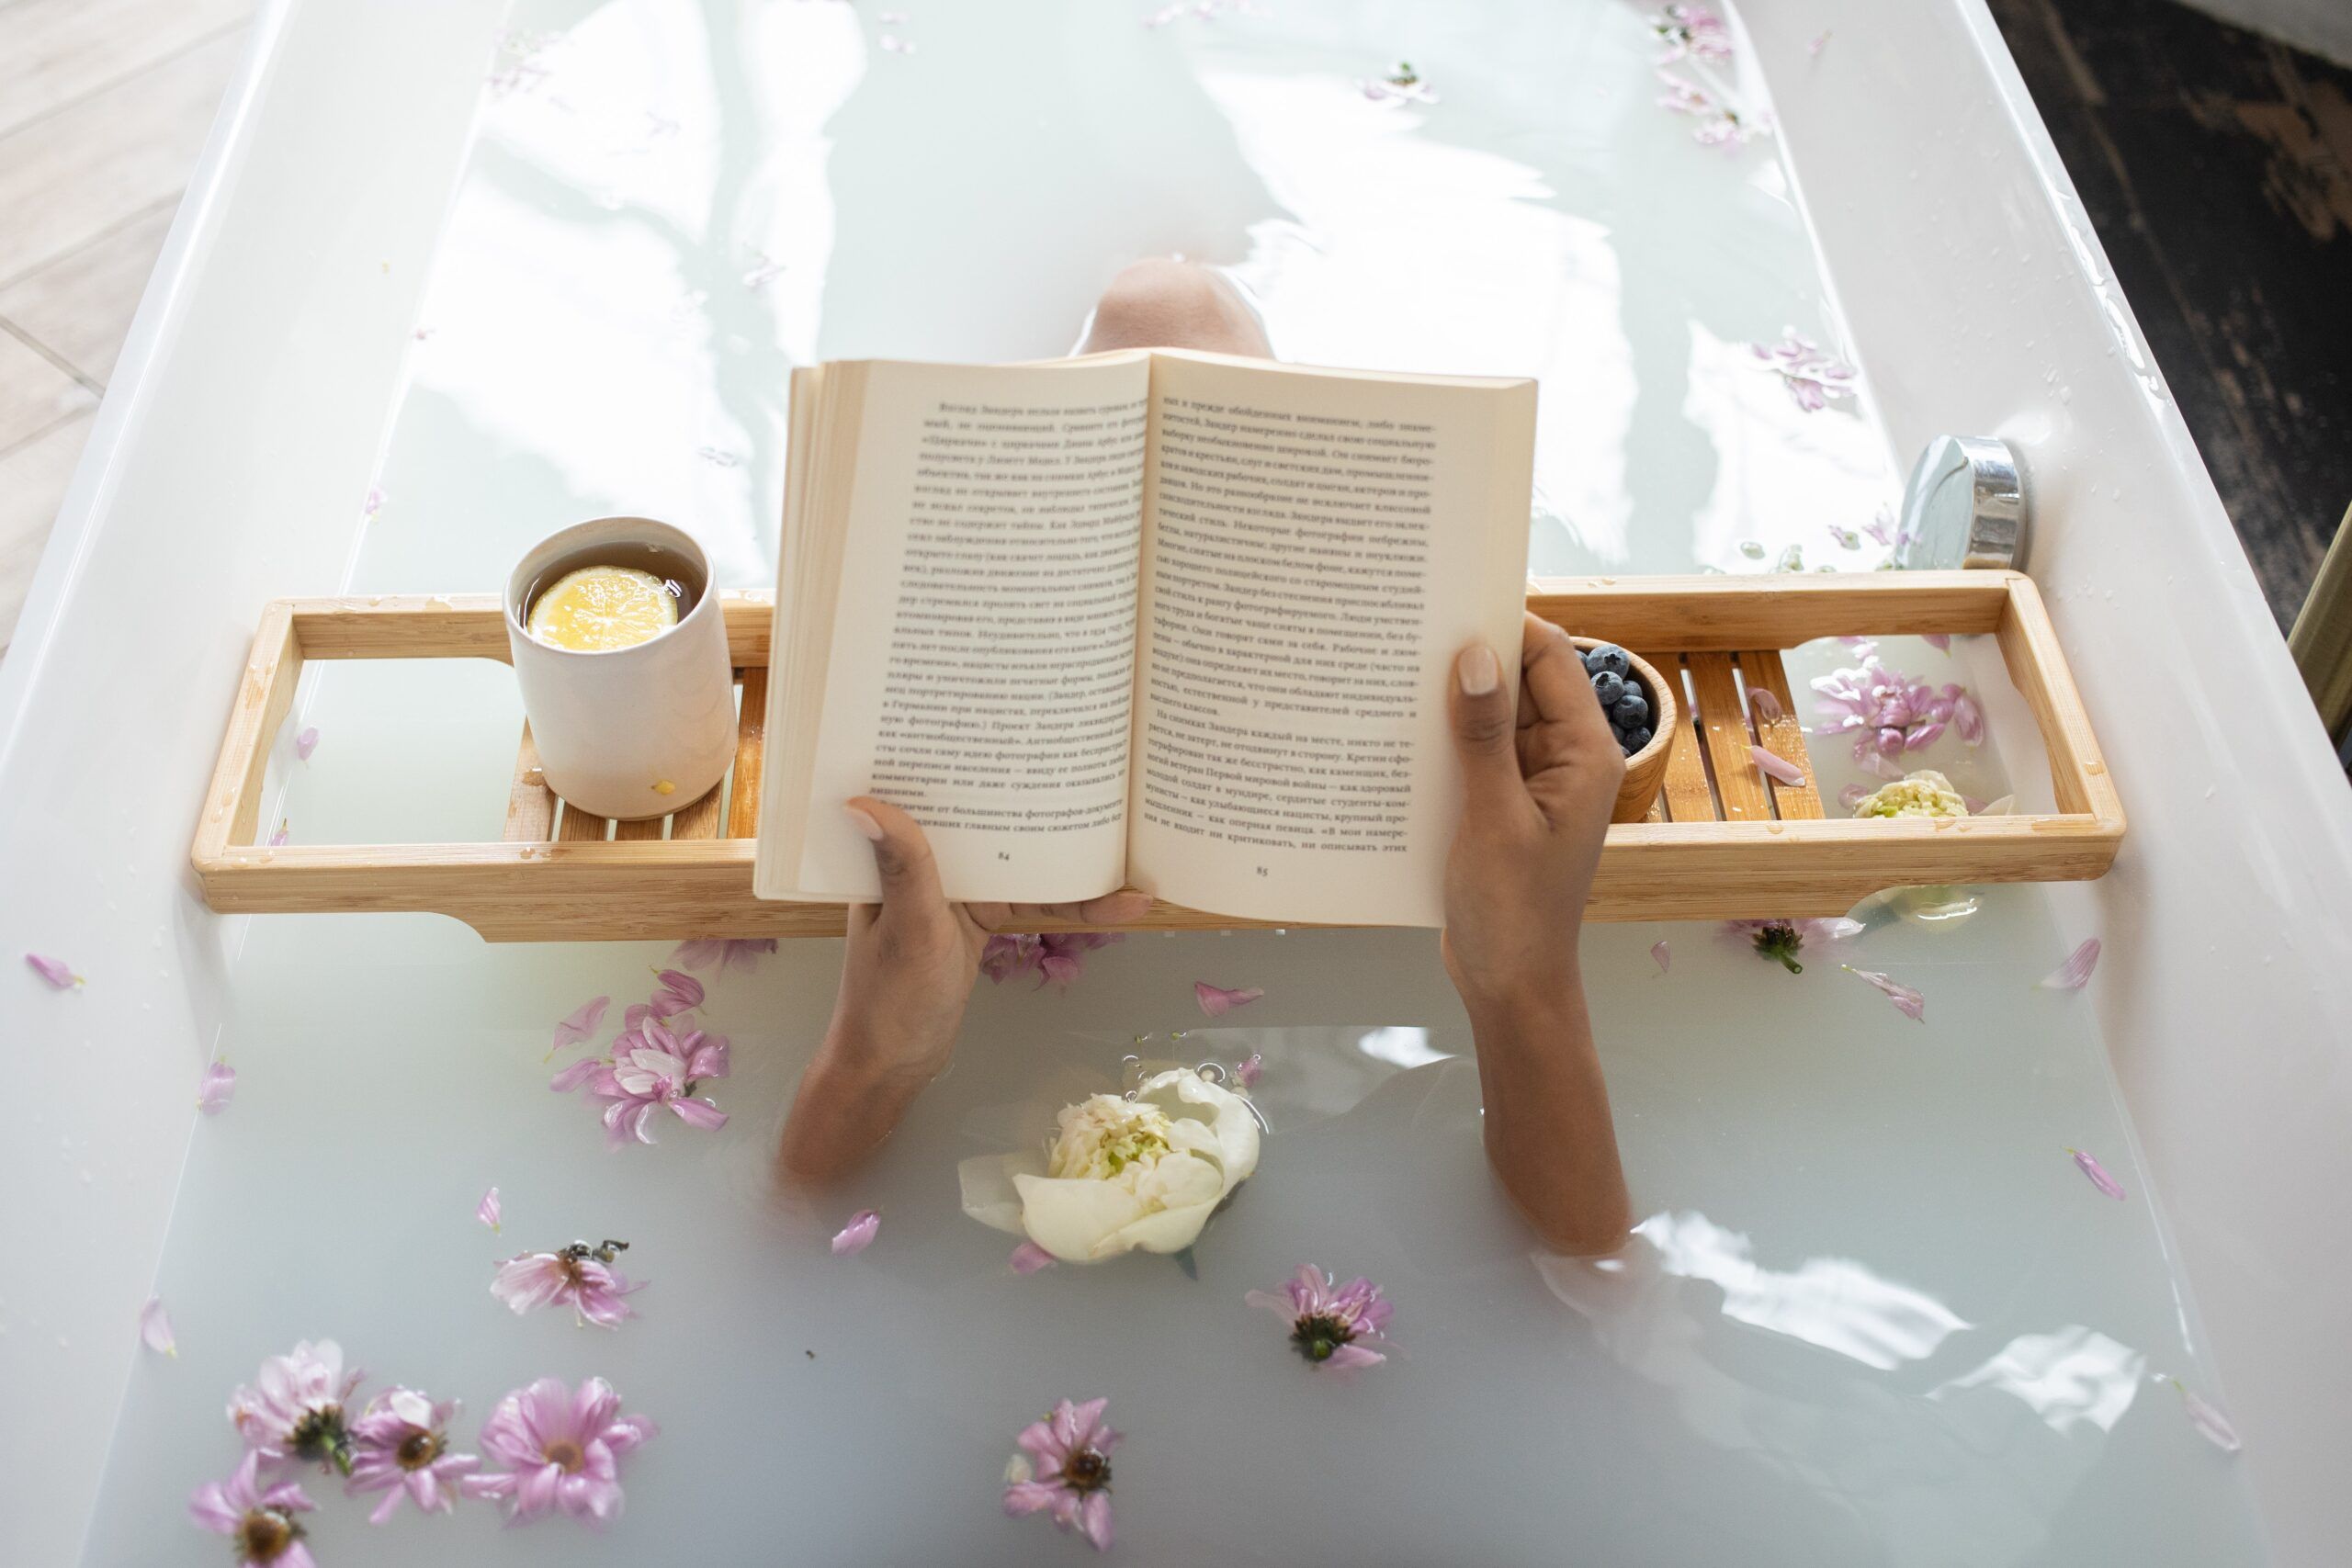 A photo of someone reading in the bath with candles and flower petals